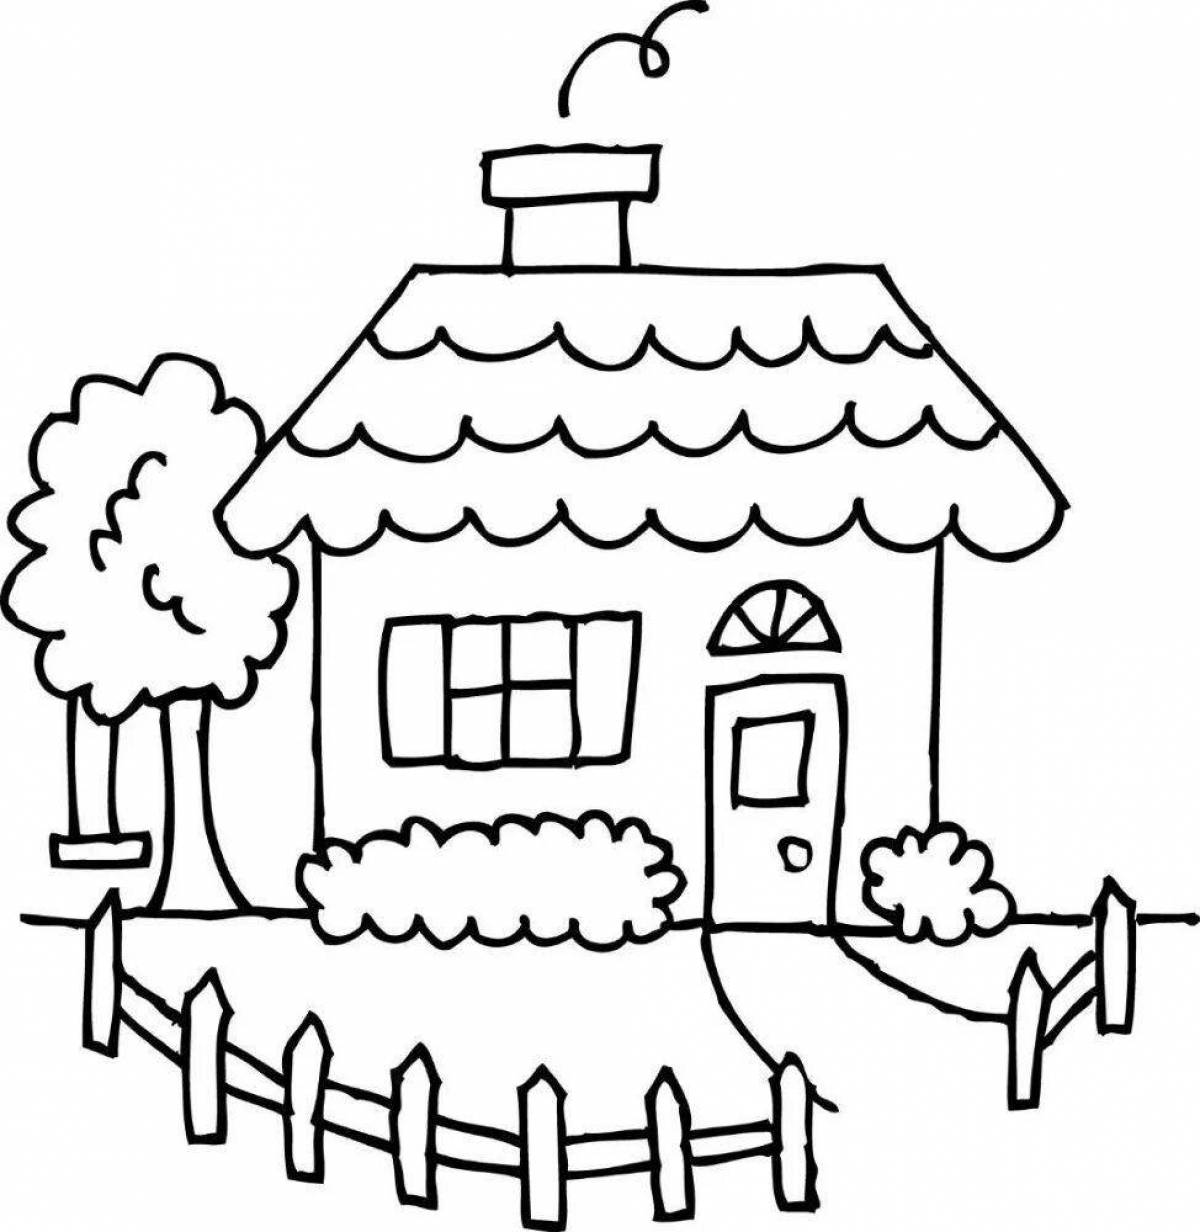 Beautiful house coloring book for kids